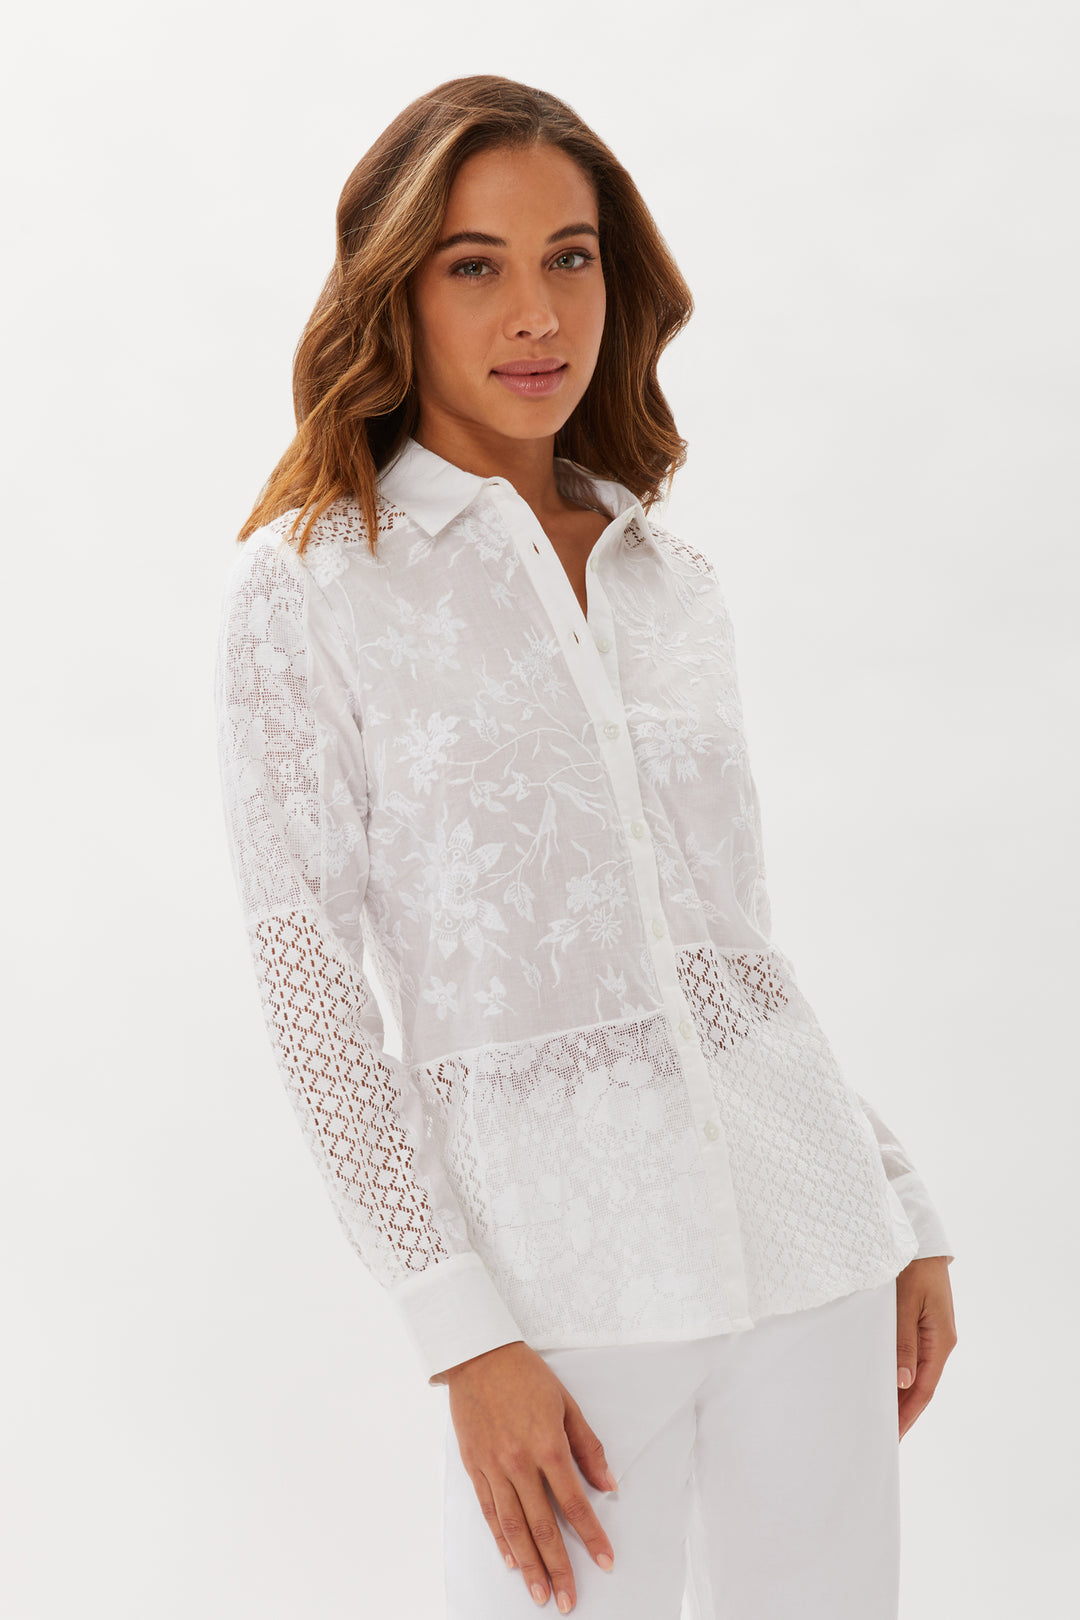 Streep Patchwork Embroidery Shirt - White